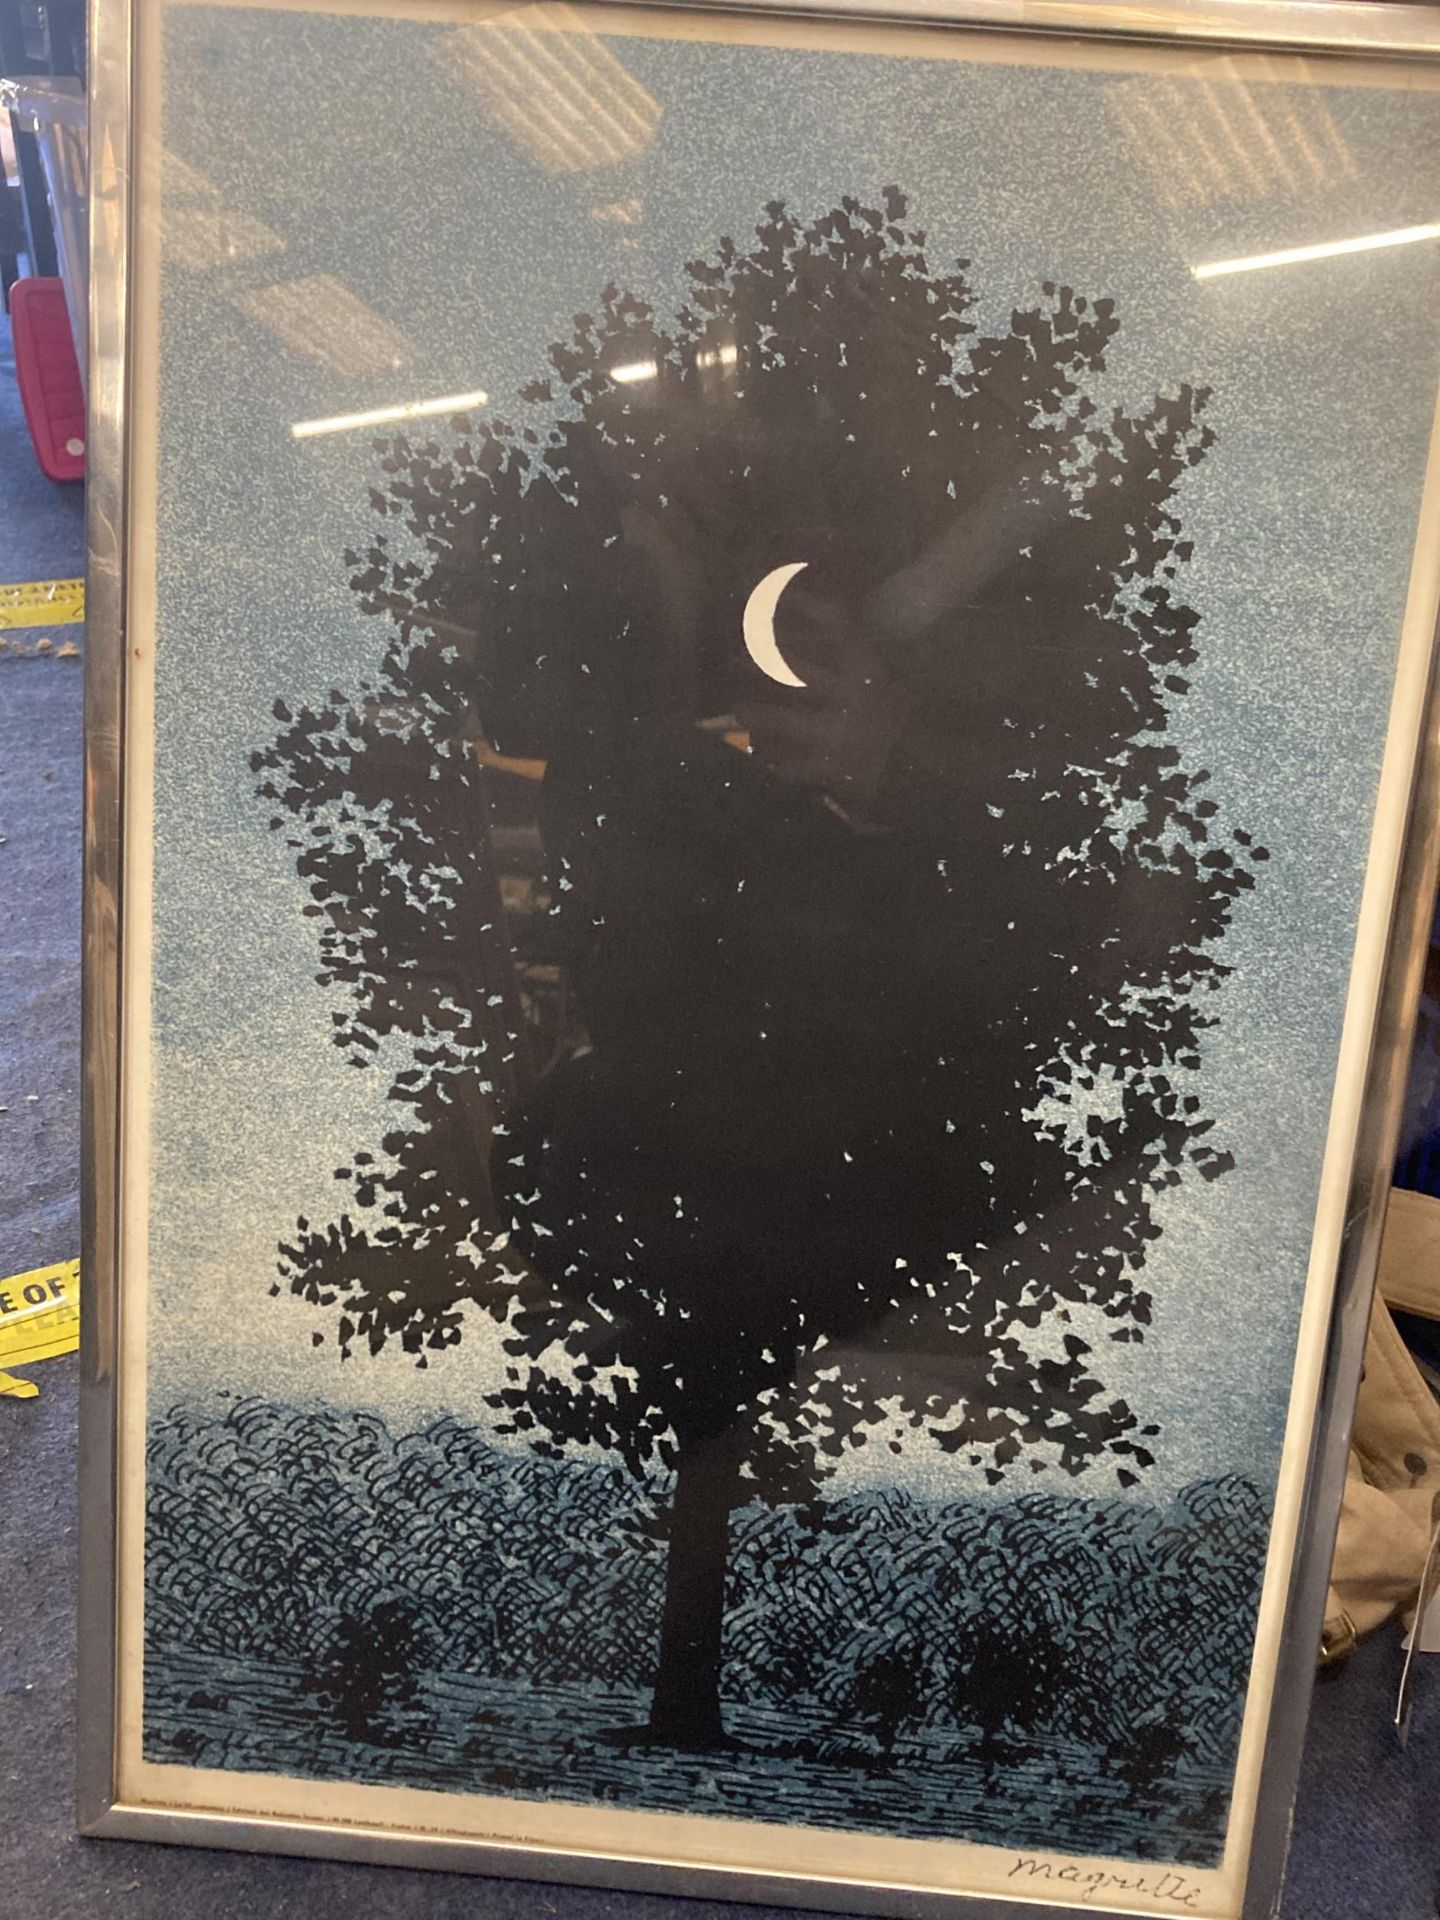 A FRAMED MAGRITTE PRINT OF A SUPERIMPOSED CRESCENT MOON IN FRONT OF A TREE, TITLED LE SEIZE